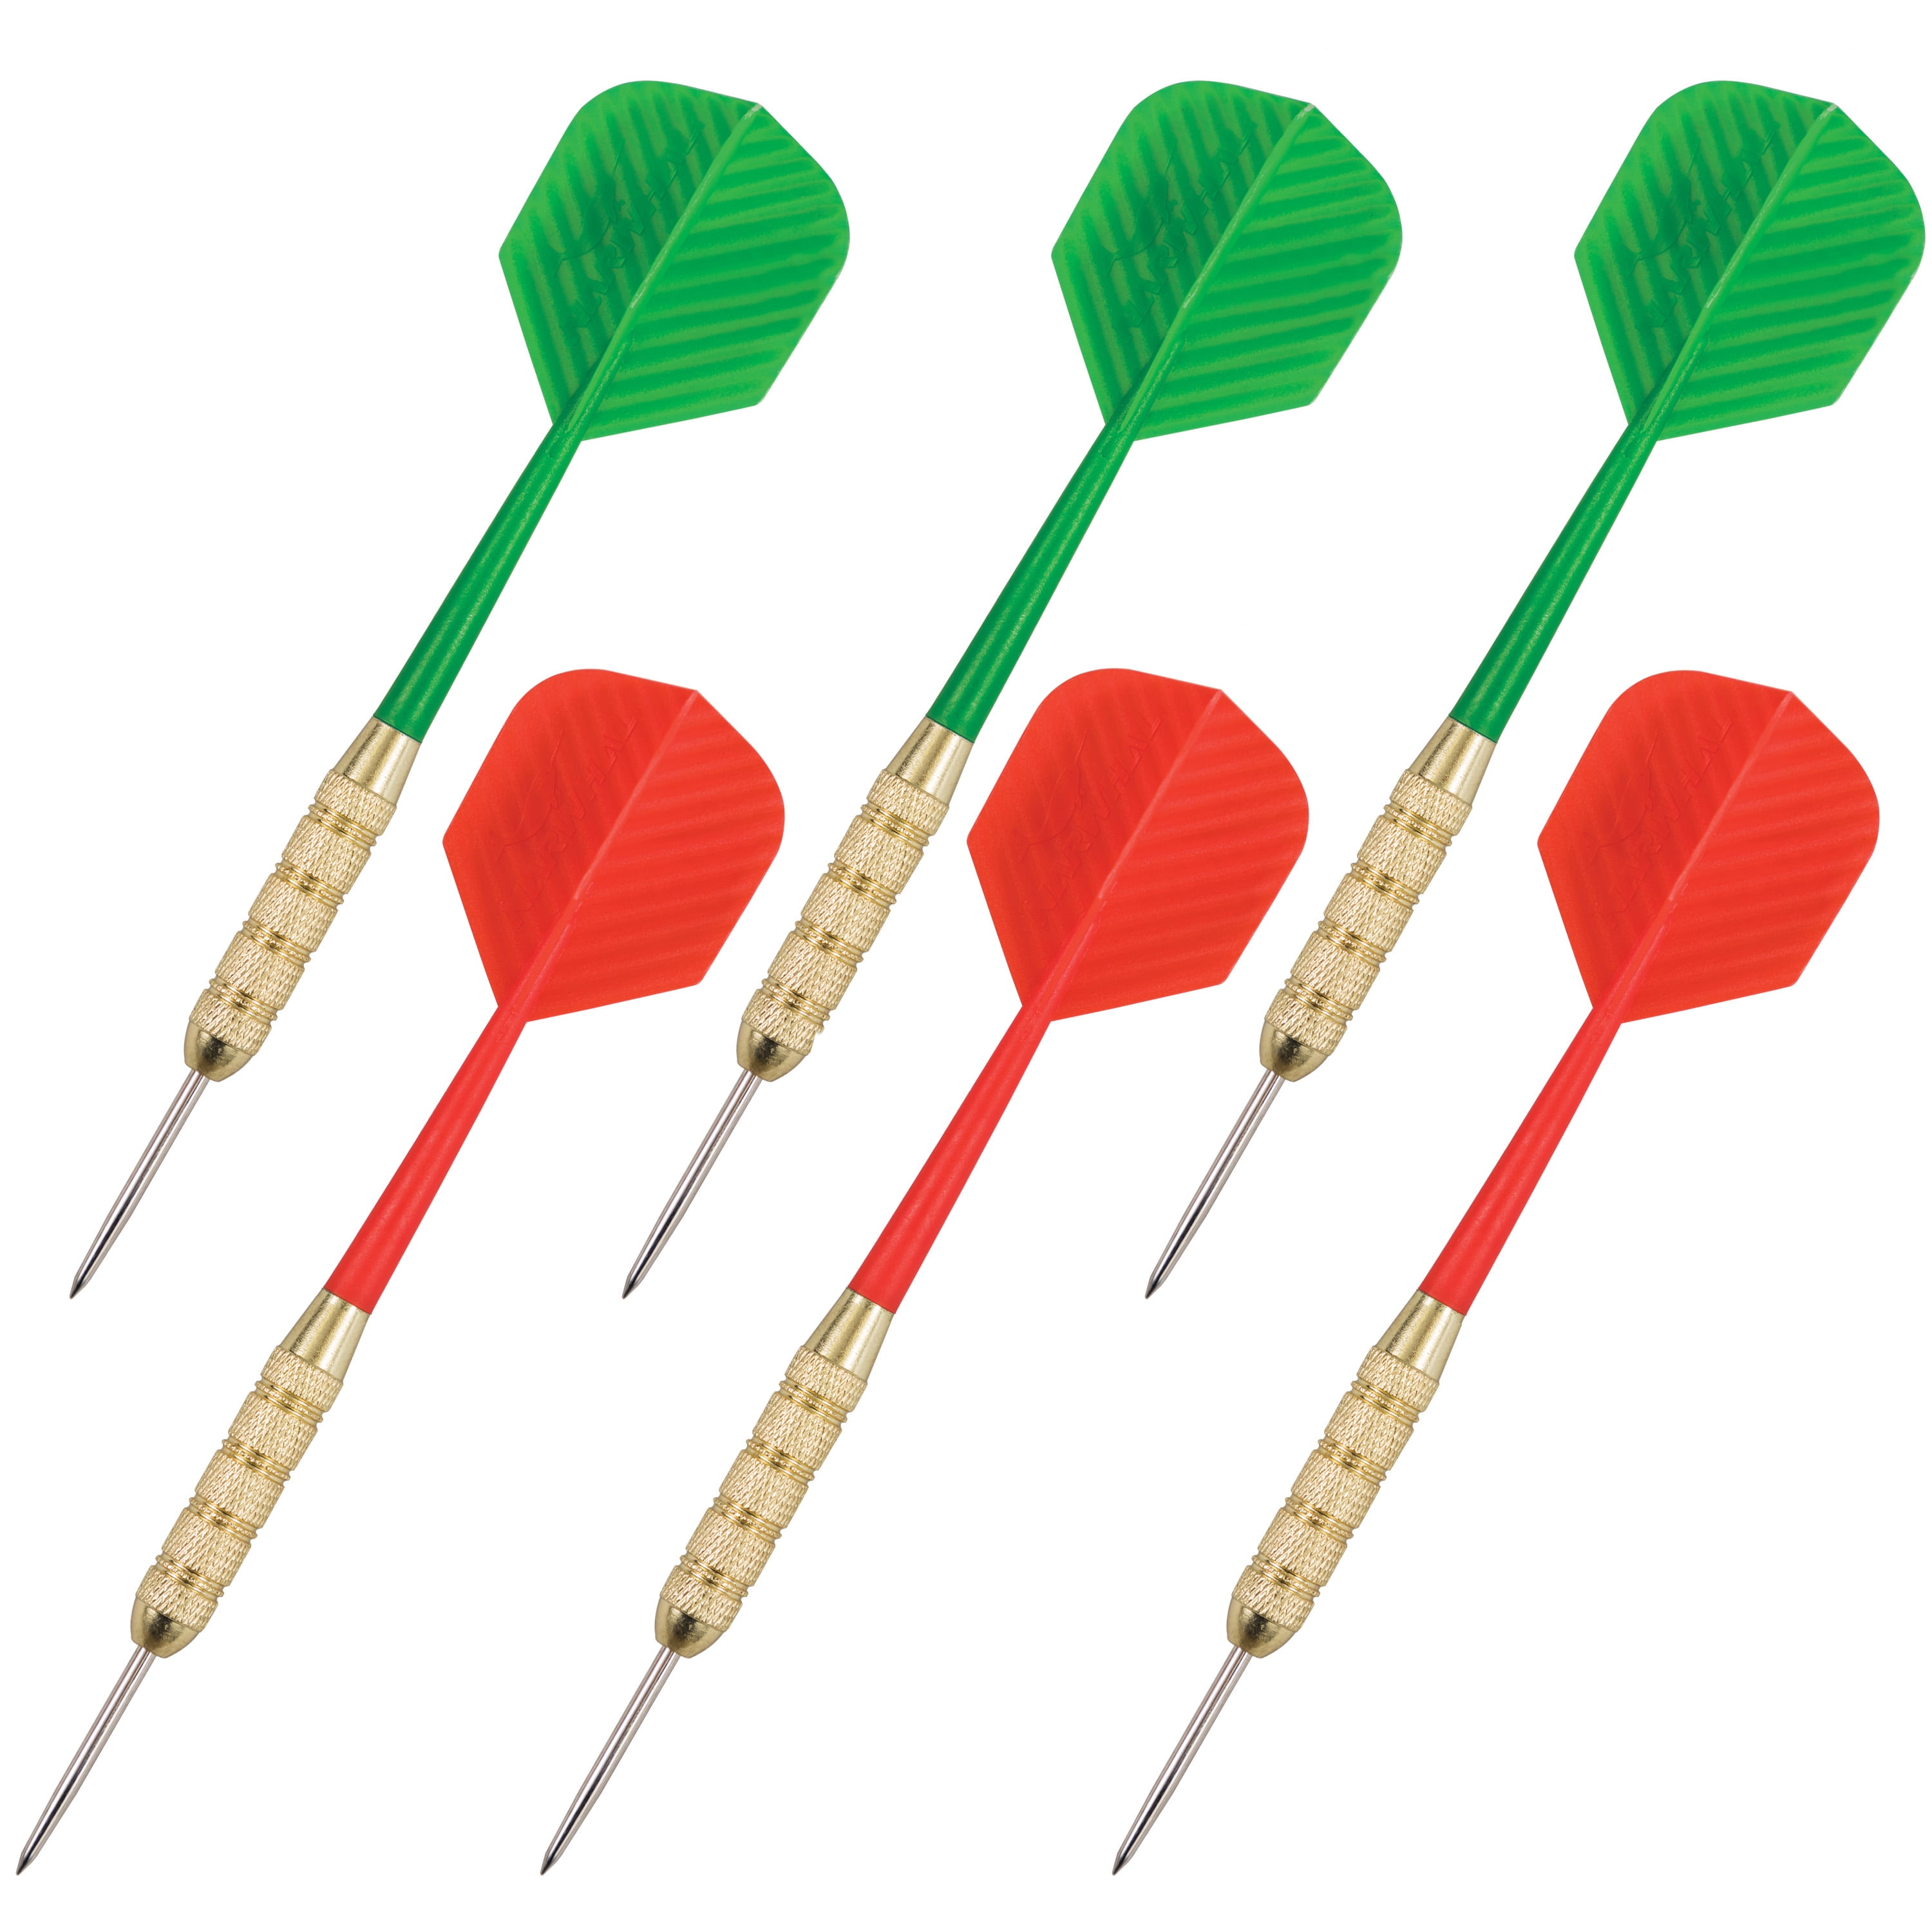 Details about   NEW Narwhal Tournament Darts Soft Tip 18g Brand With Extras For Electronic Board 